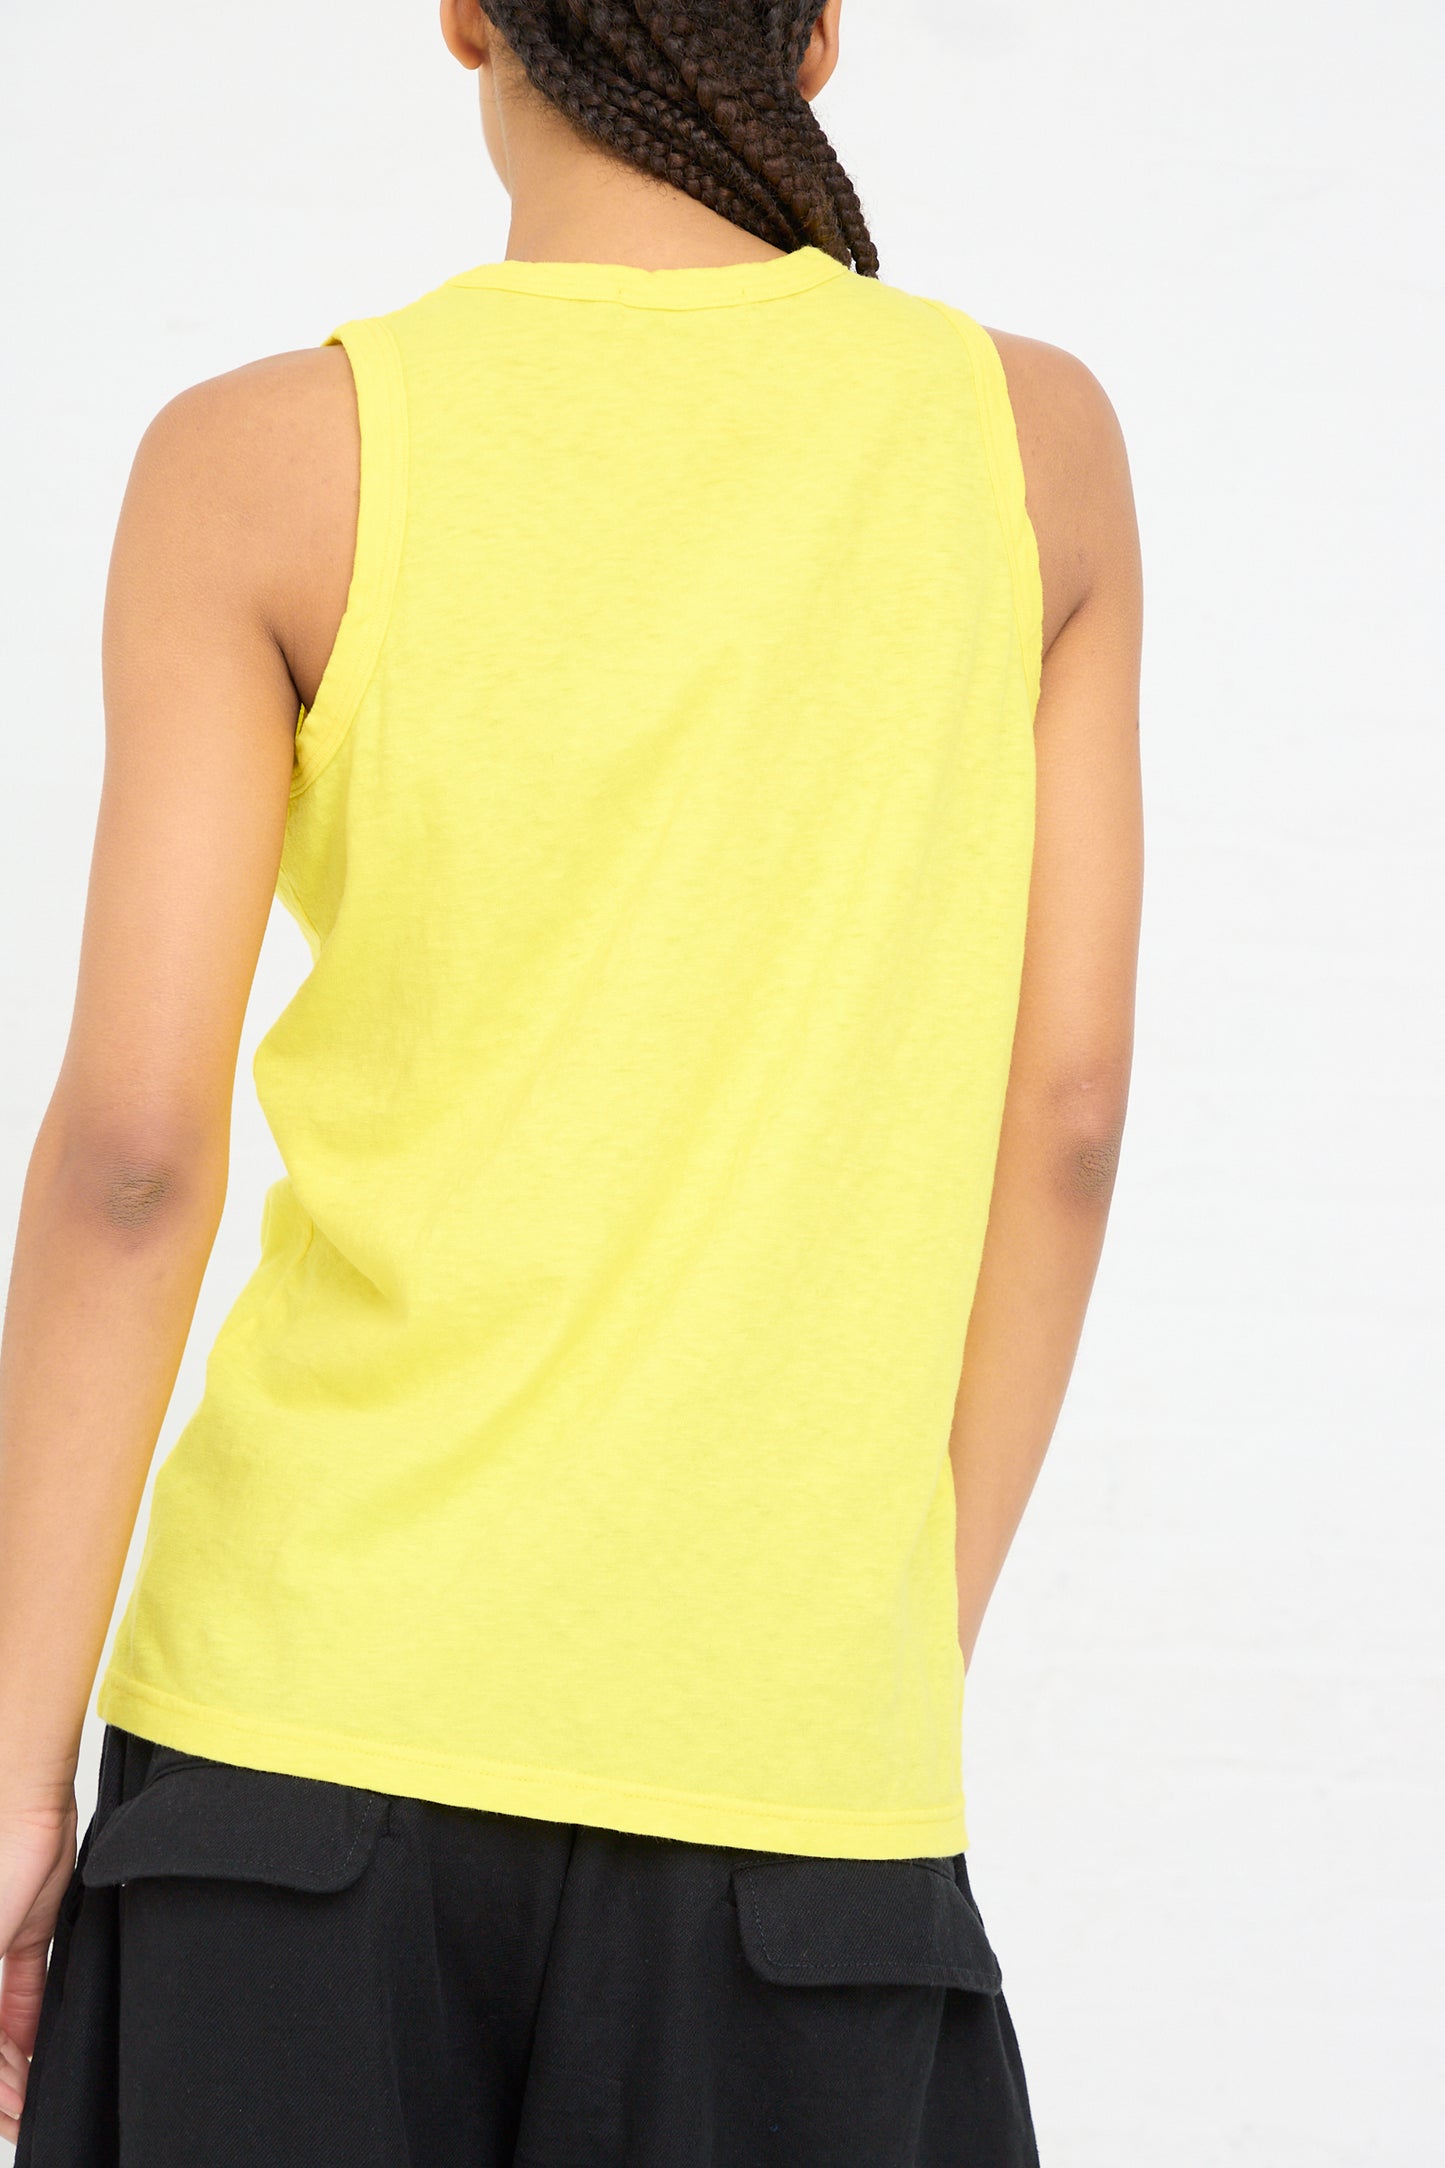 Woman seen from behind wearing a lightweight Cotton Tank in Lemon by Ichi Antiquités and black pants.